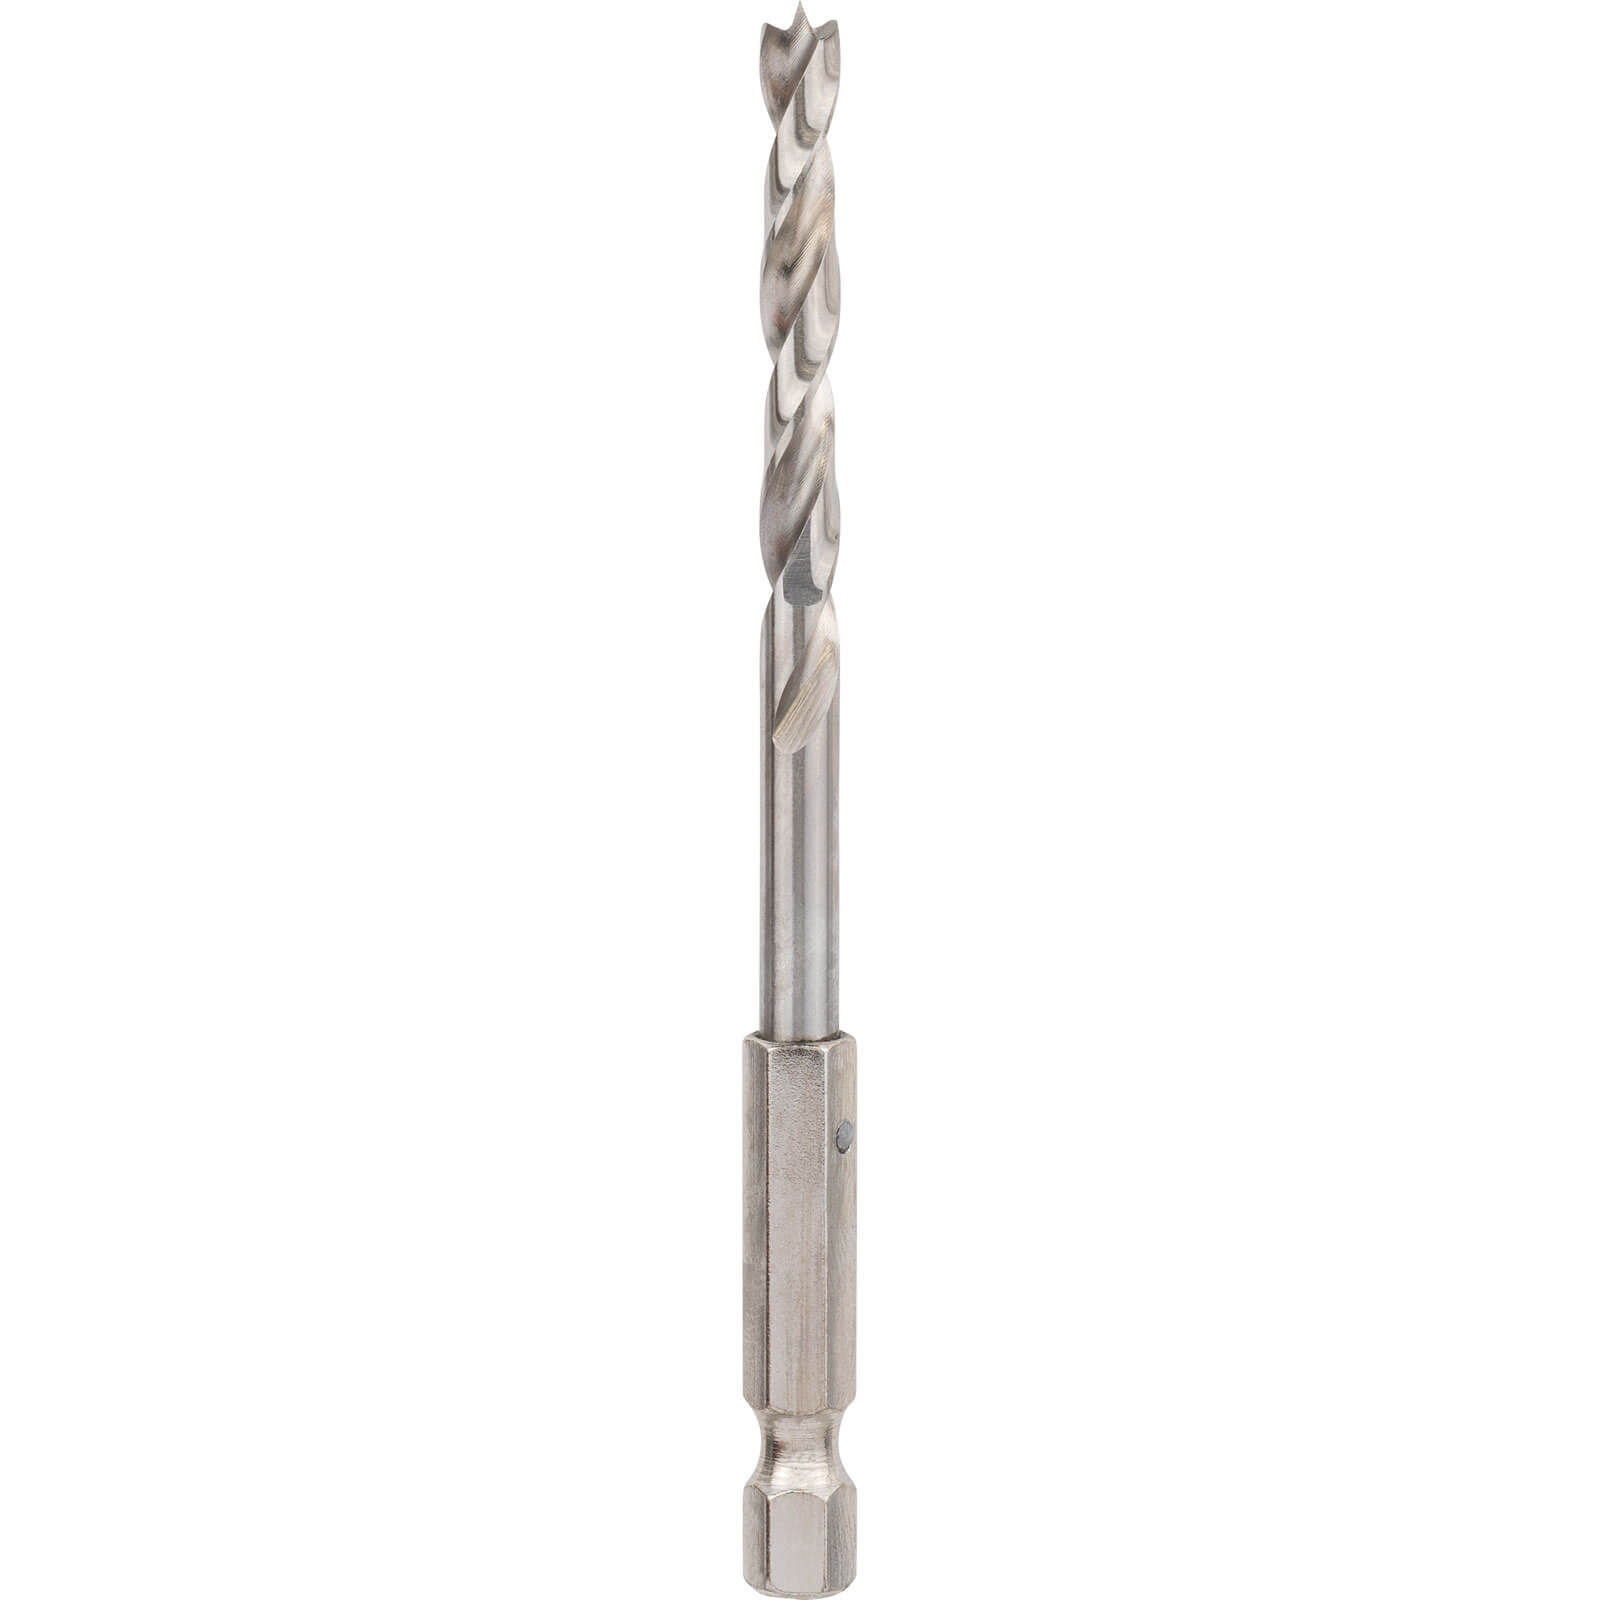 Image of Bosch Hex Shank Drill Bit for Wood 5mm